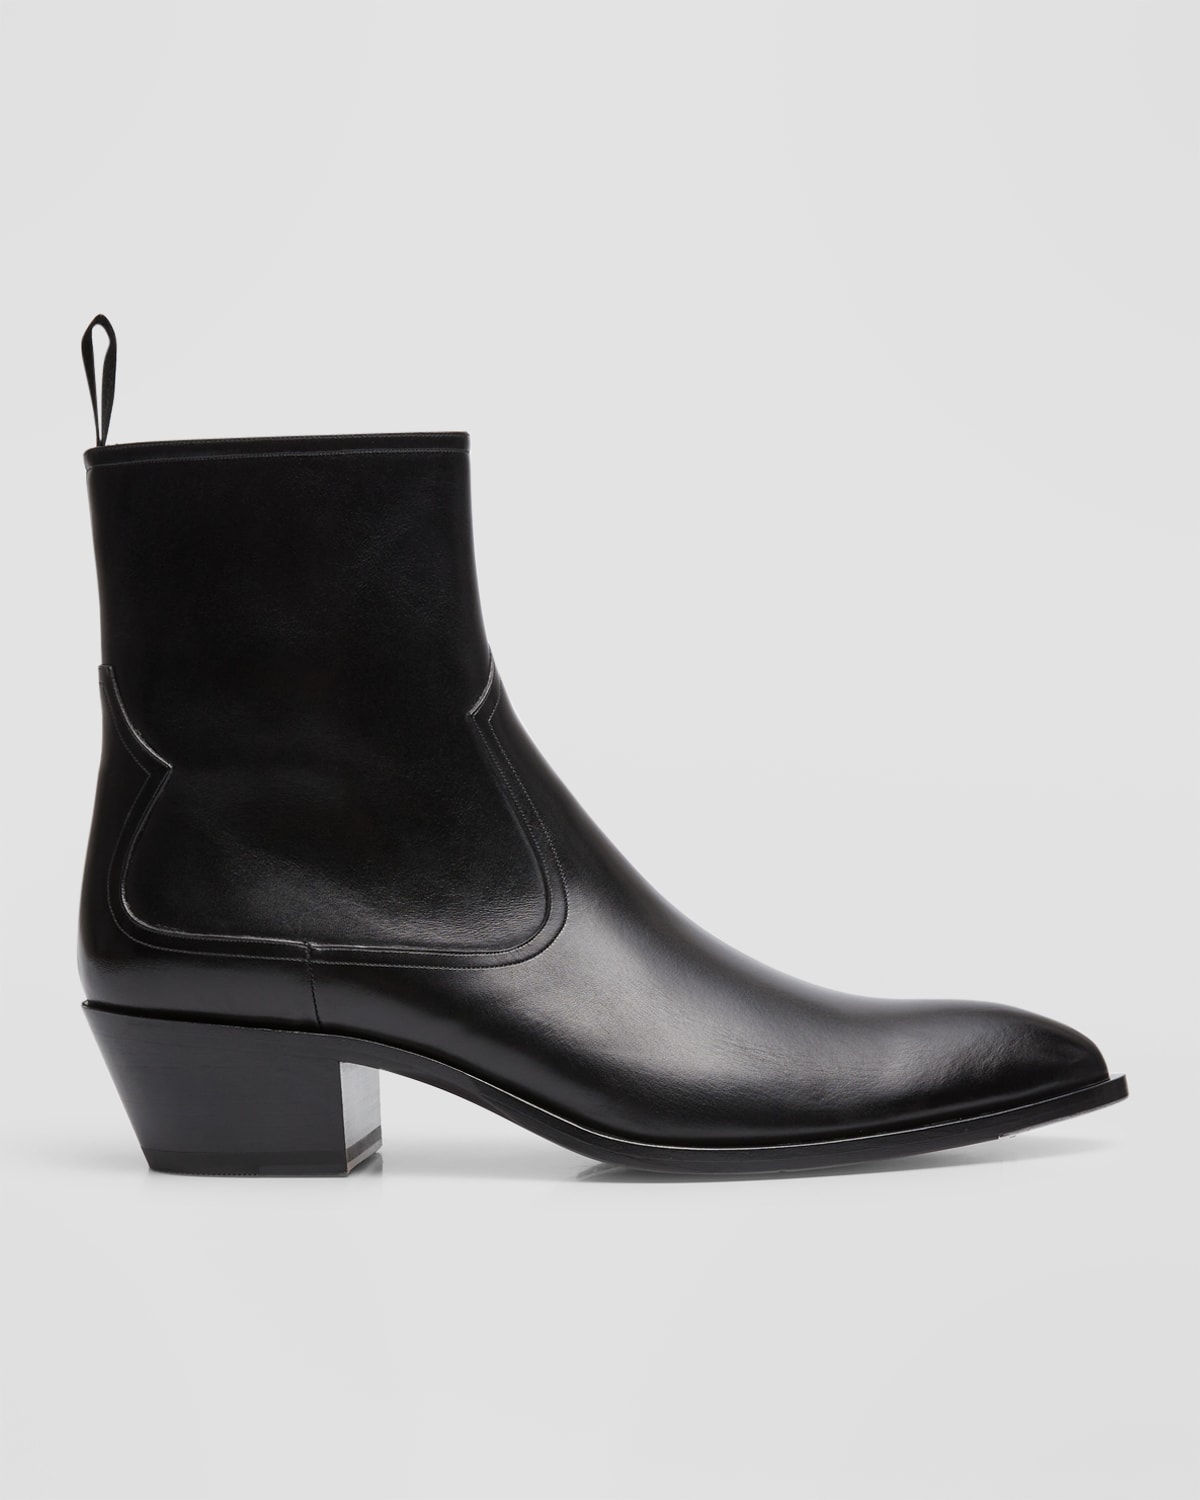 BALLY MEN'S GAIMAN LEATHER ANKLE BOOTS